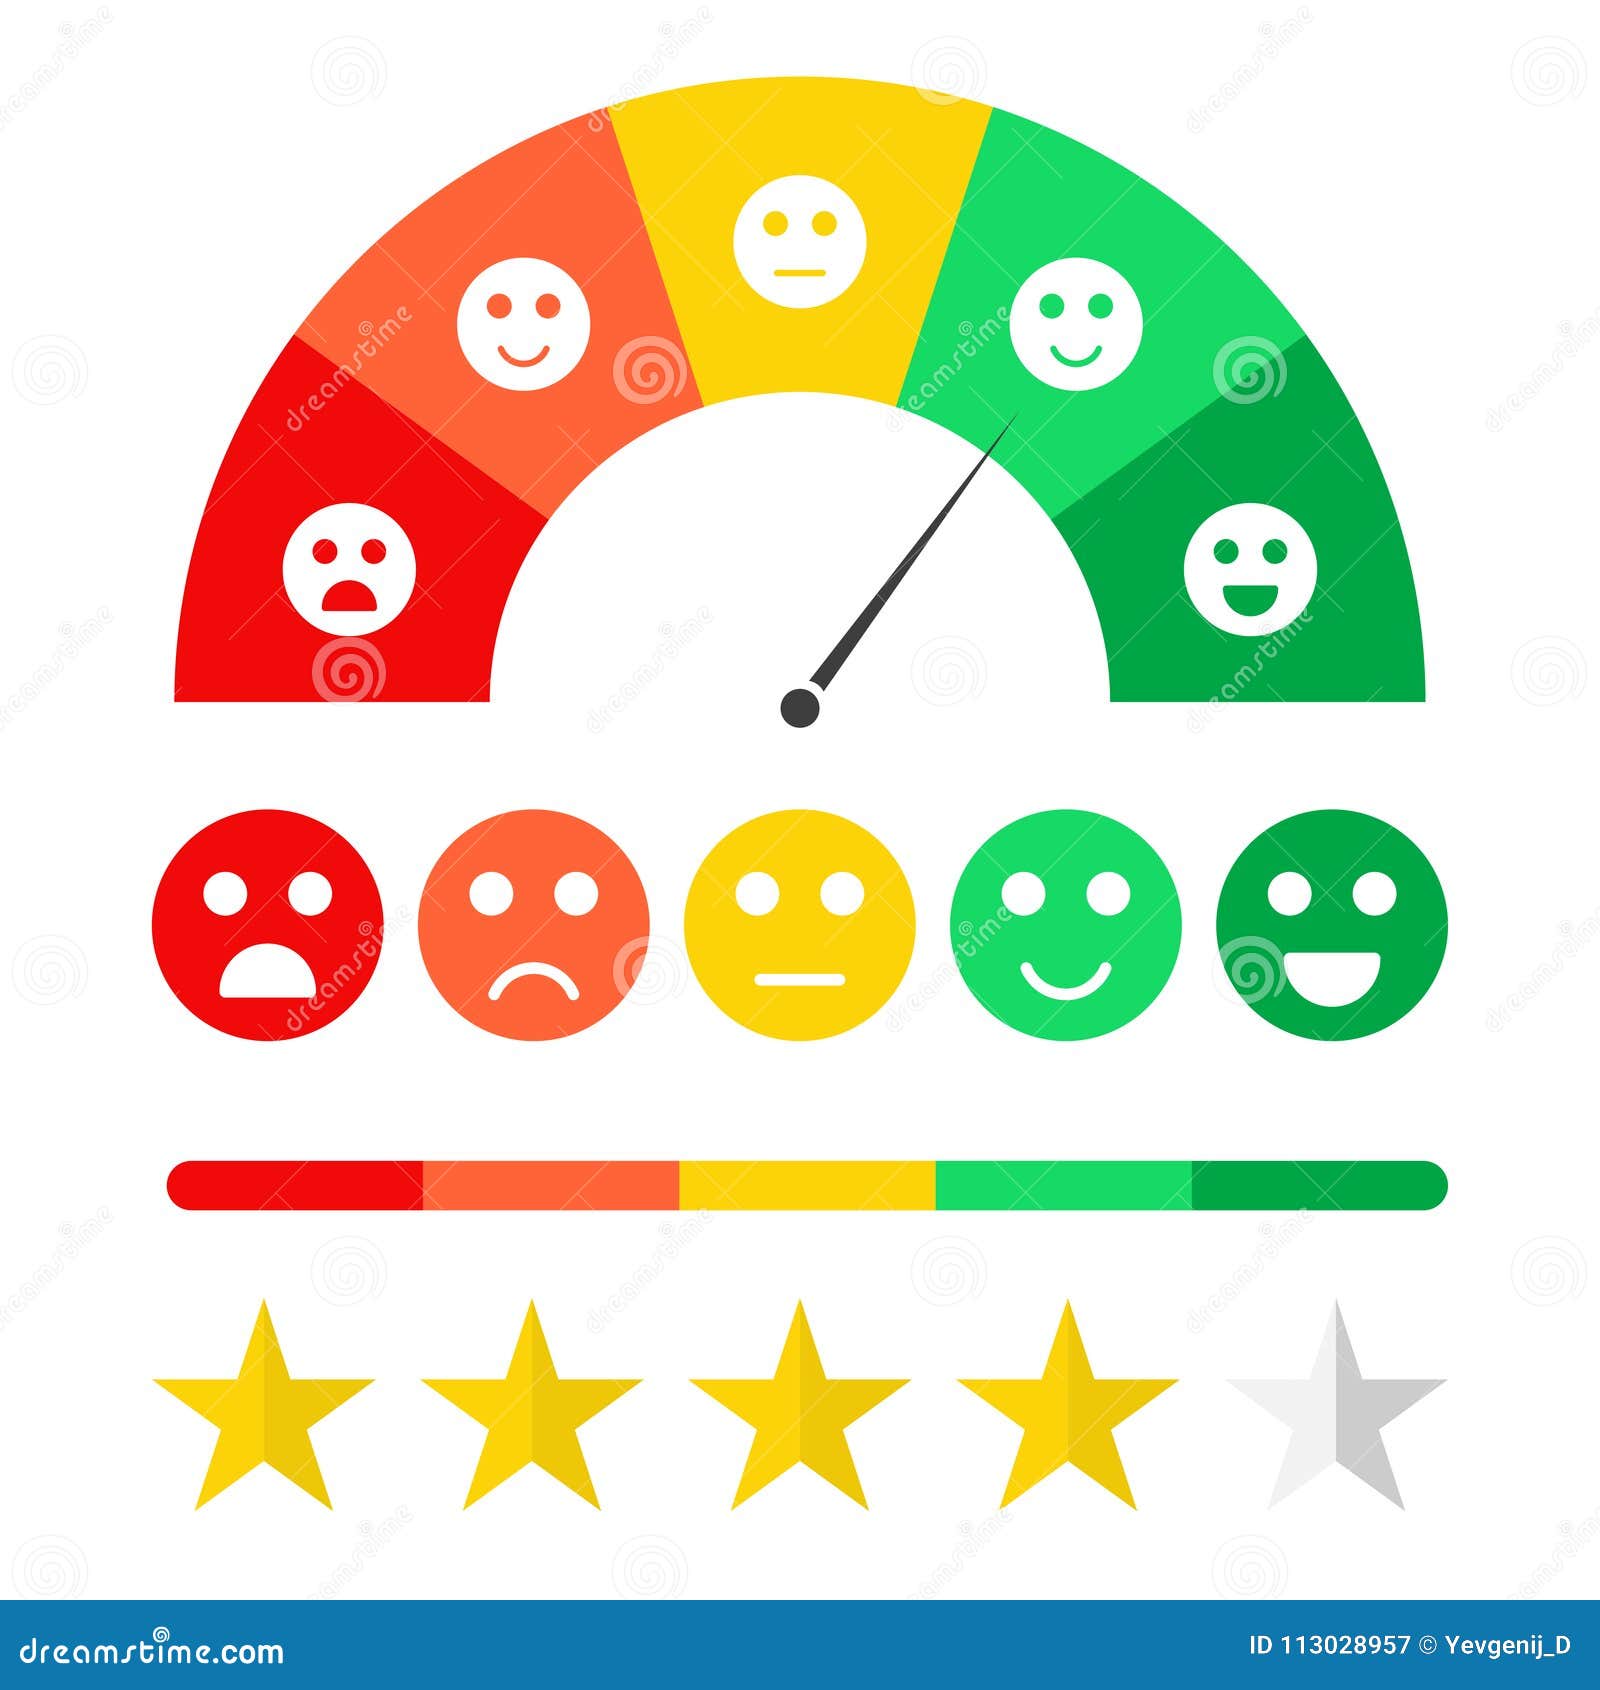 customer feedback concept. emoticon scale and rating satisfaction. survey for clients, rating system concept